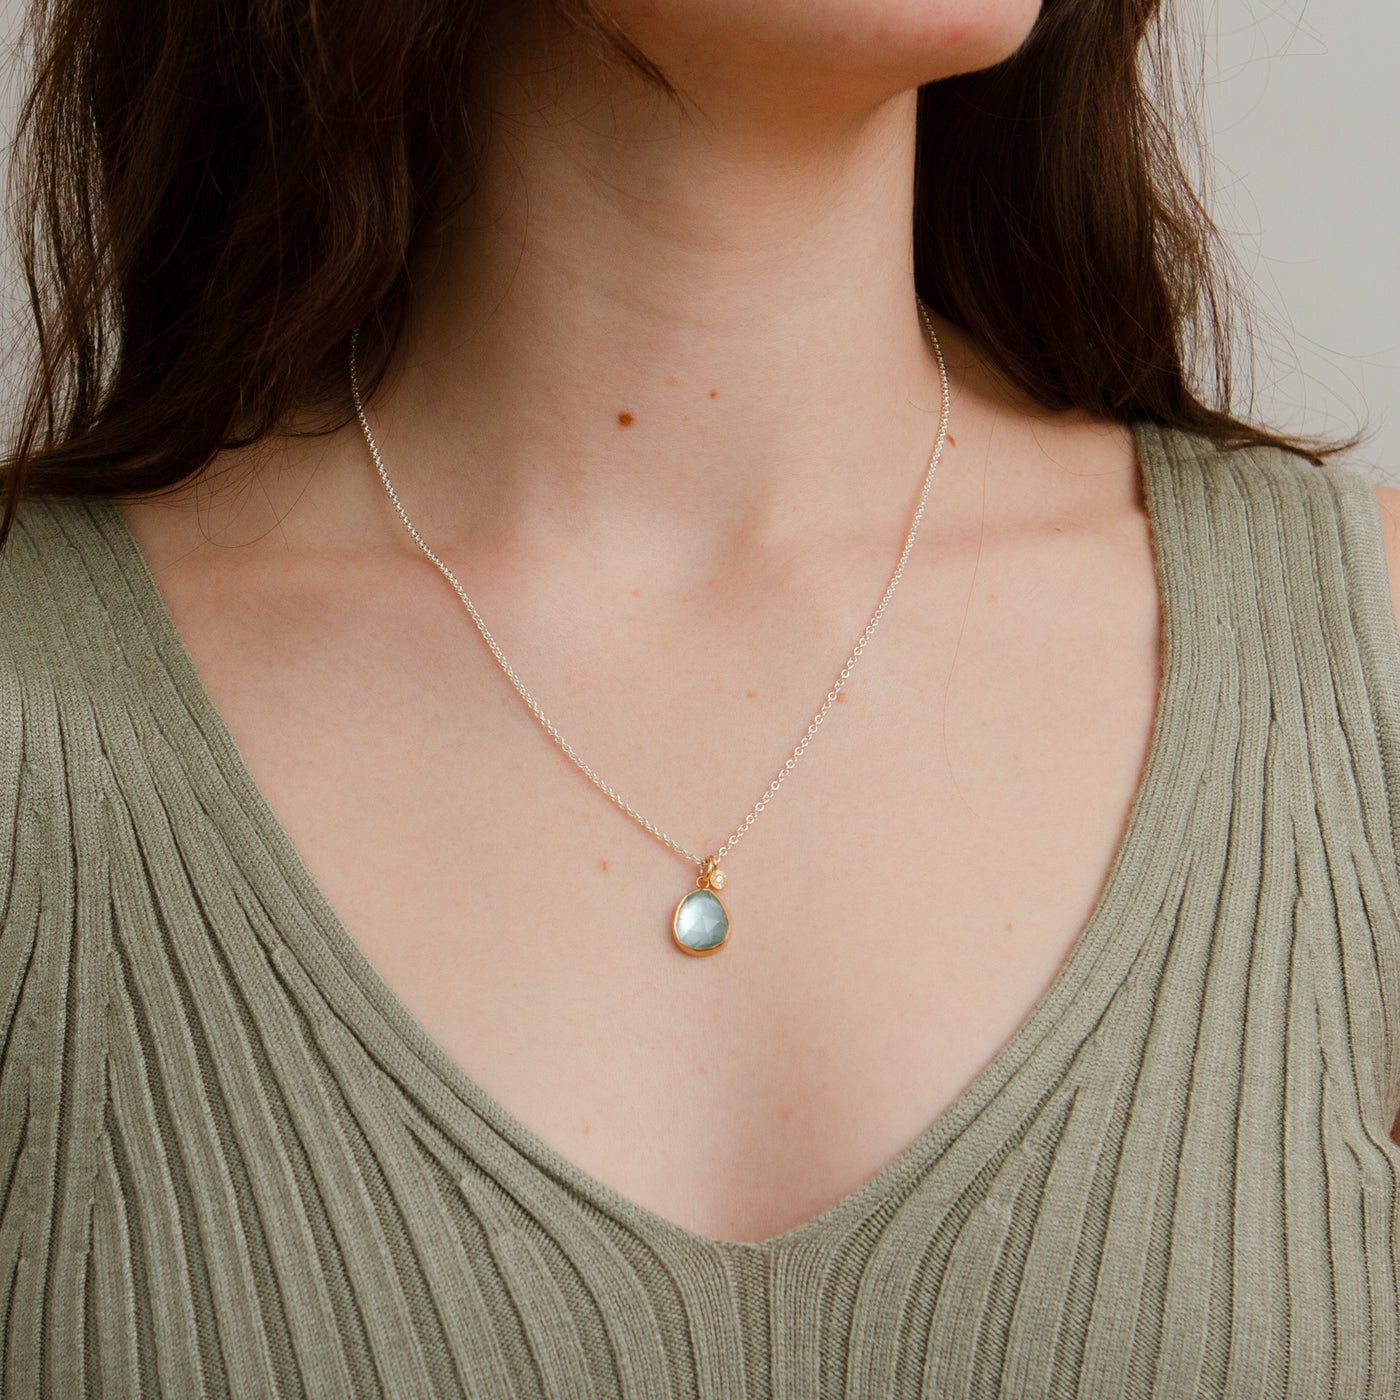 Aquamarine Silver and Gold Theia Necklace #3 on a model